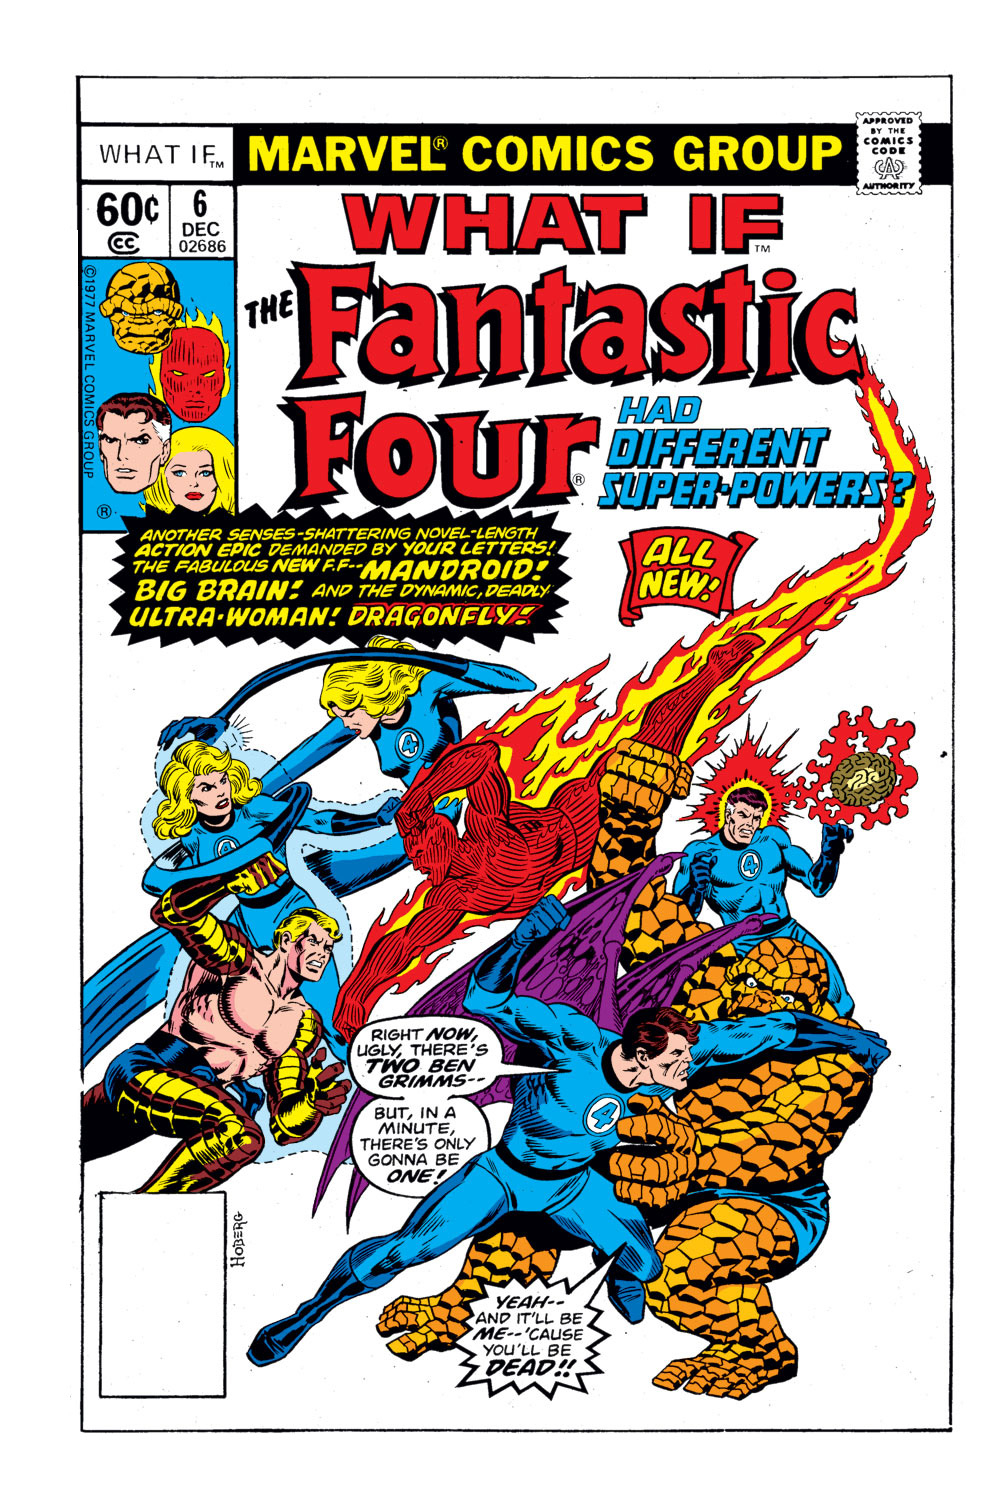 What If? (1977) 6_-_The_Fantastic_Four_had_different_superpowers Page 1